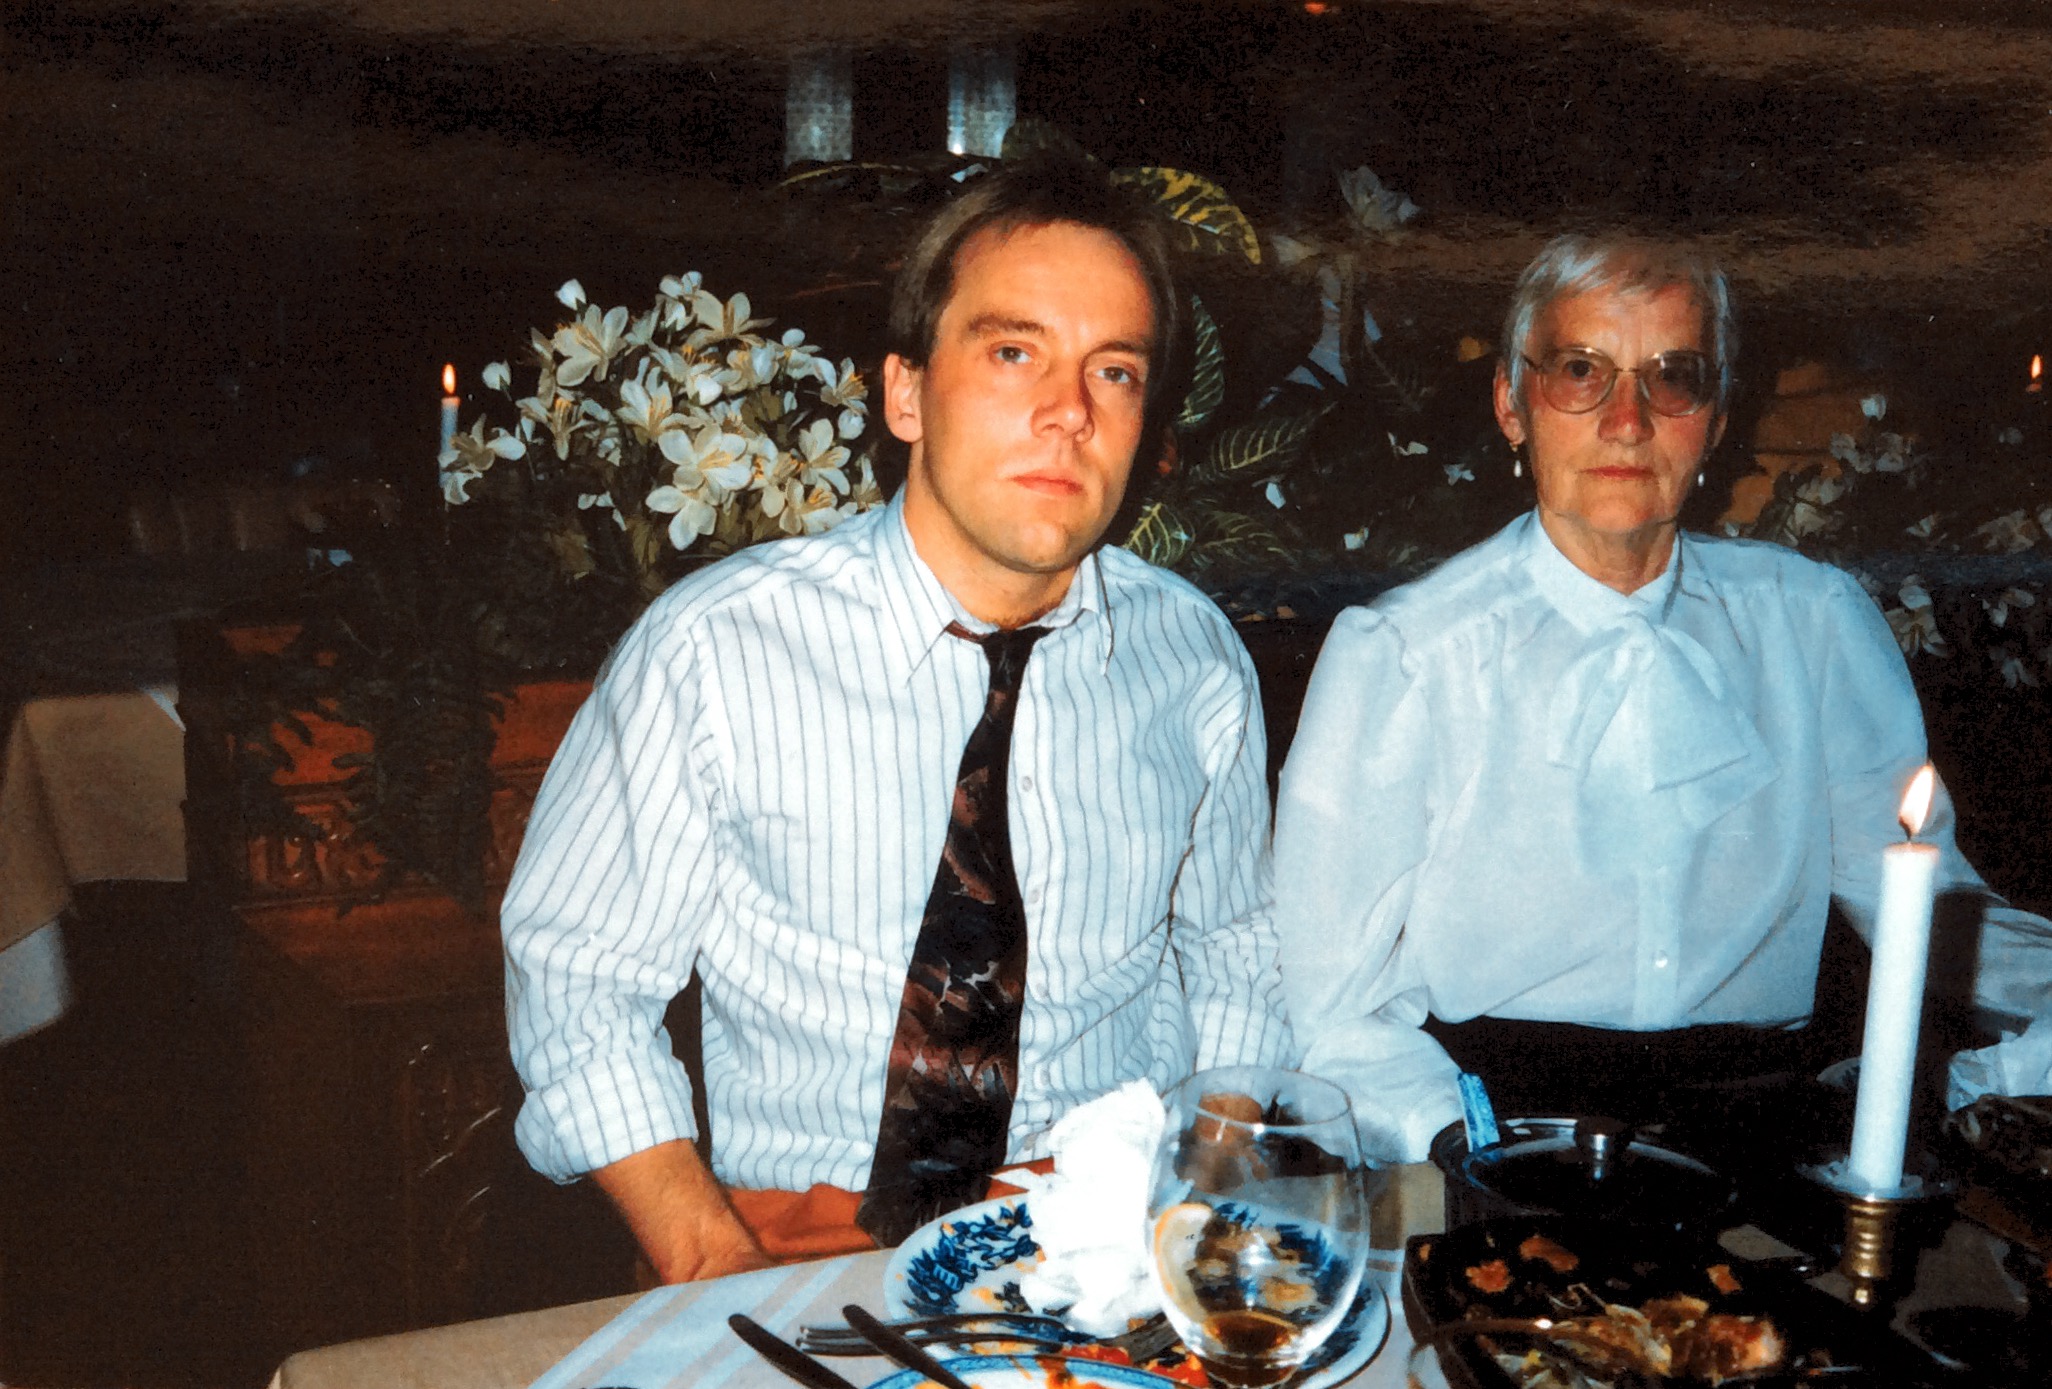 OUR HALF BROTHER, TORSTEN LANDSKRON, WITH HIS MOM, IRMGARD, OUR STEP MOM…6 MONTHS AFTER THIS PHOTO, TORSTEN COMMITTED SUICIDE, NOVEMBER 1991…this photo was Torsten,s 30th birthday..